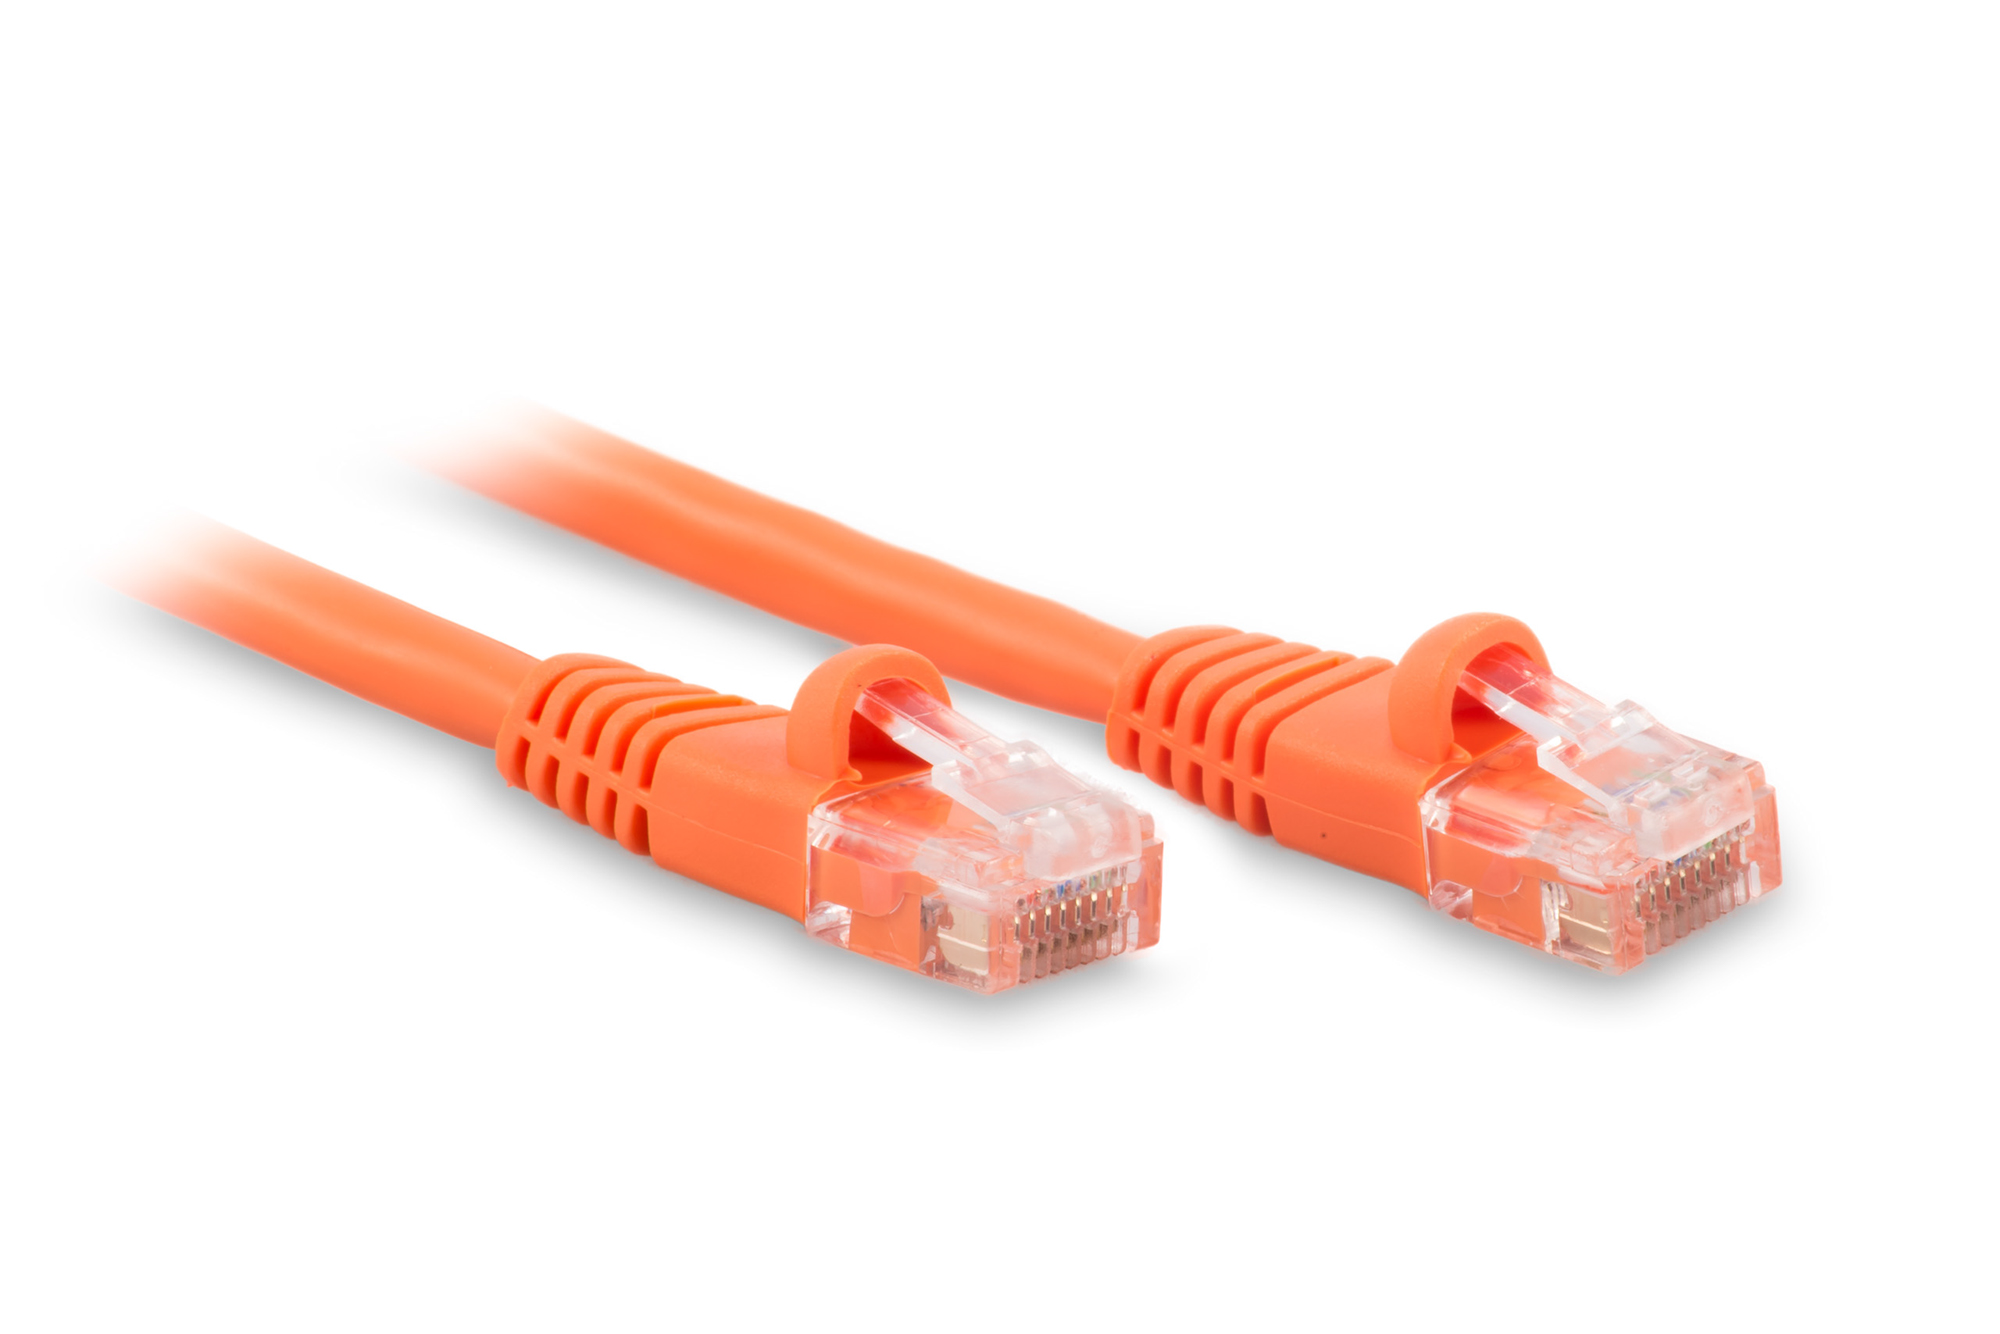 100ft Cat6 Ethernet Patch Cable - Orange Color - Snagless Boot